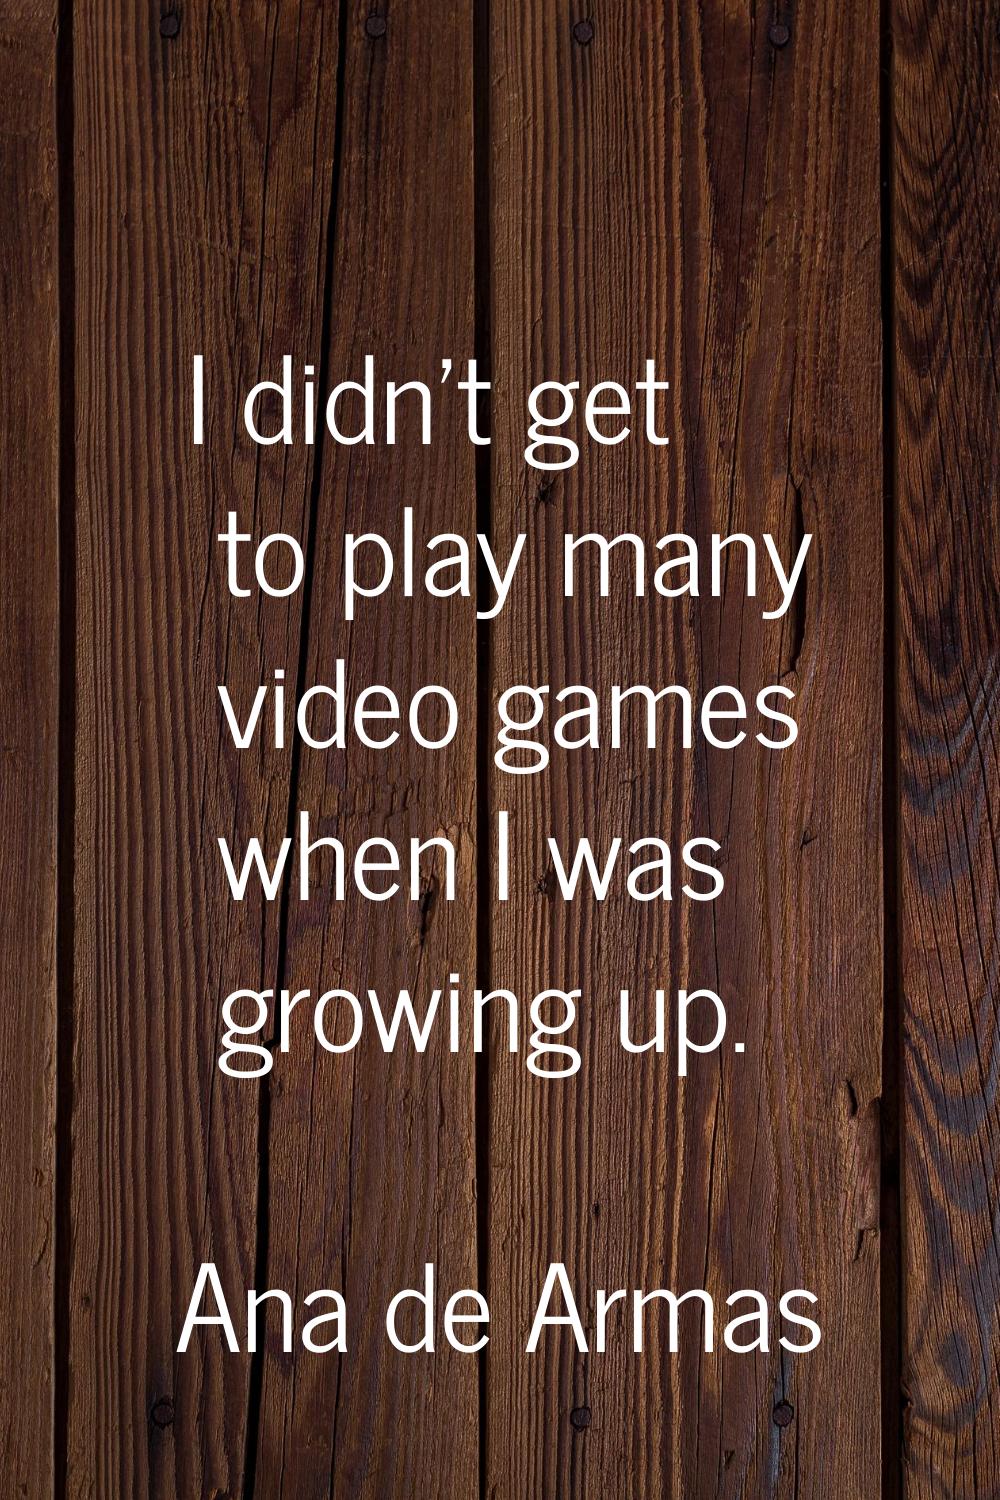 I didn't get to play many video games when I was growing up.